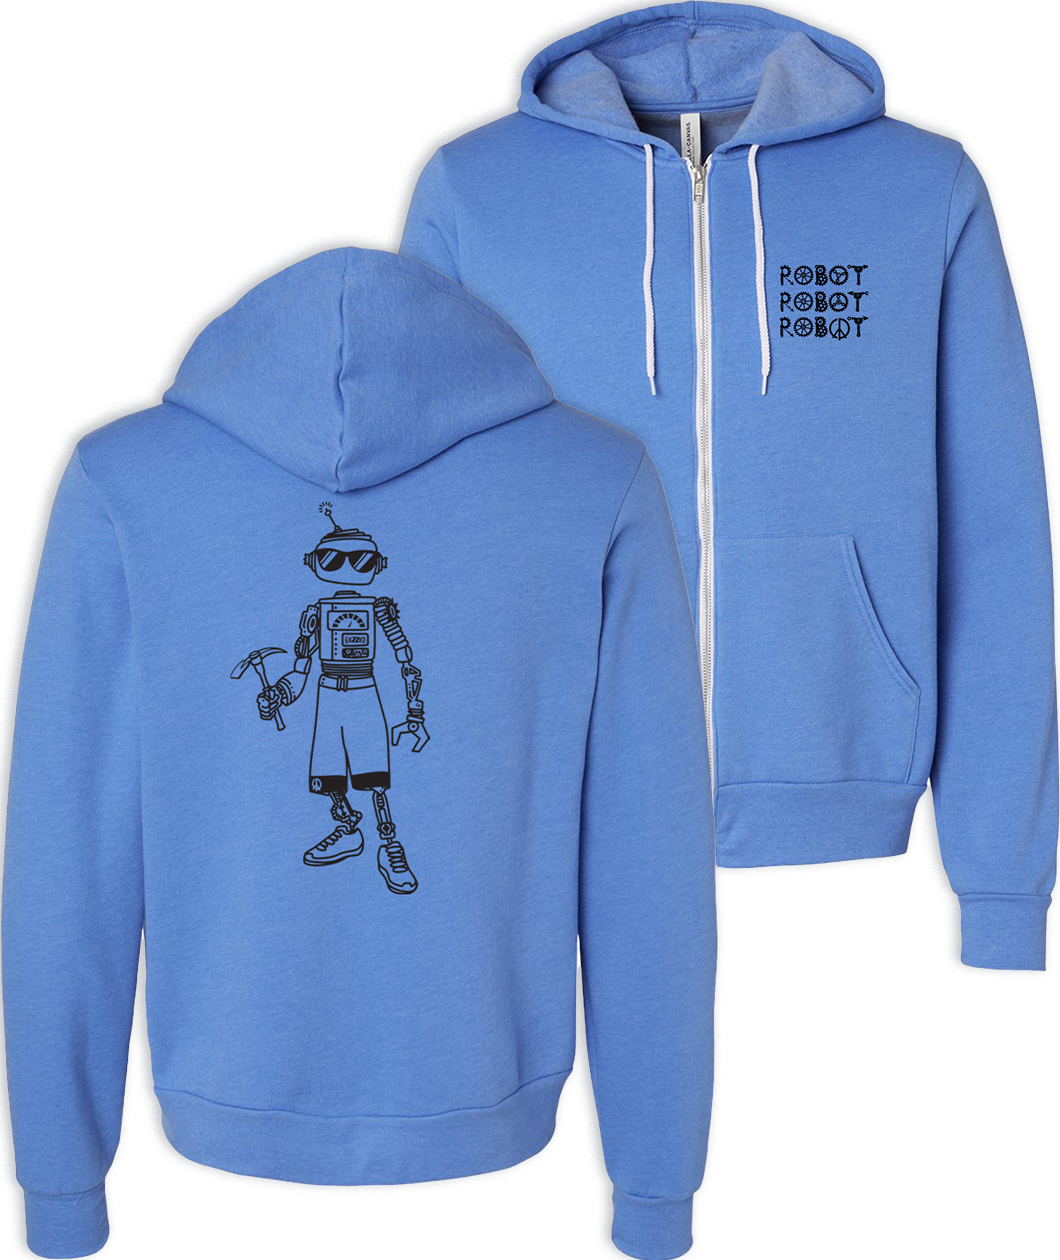 Courtney Dauwalter Robot, Robot, Robot Sweatshirt is a full zip hoodie in Heather Columbia Blue. The illustrated phrase, Robot, Robot, Robot is screen printed on the front left chest and a black line drawing of a robot is screen printed on the center back of the hoodie. Zipper and sweatshirt strings are white.